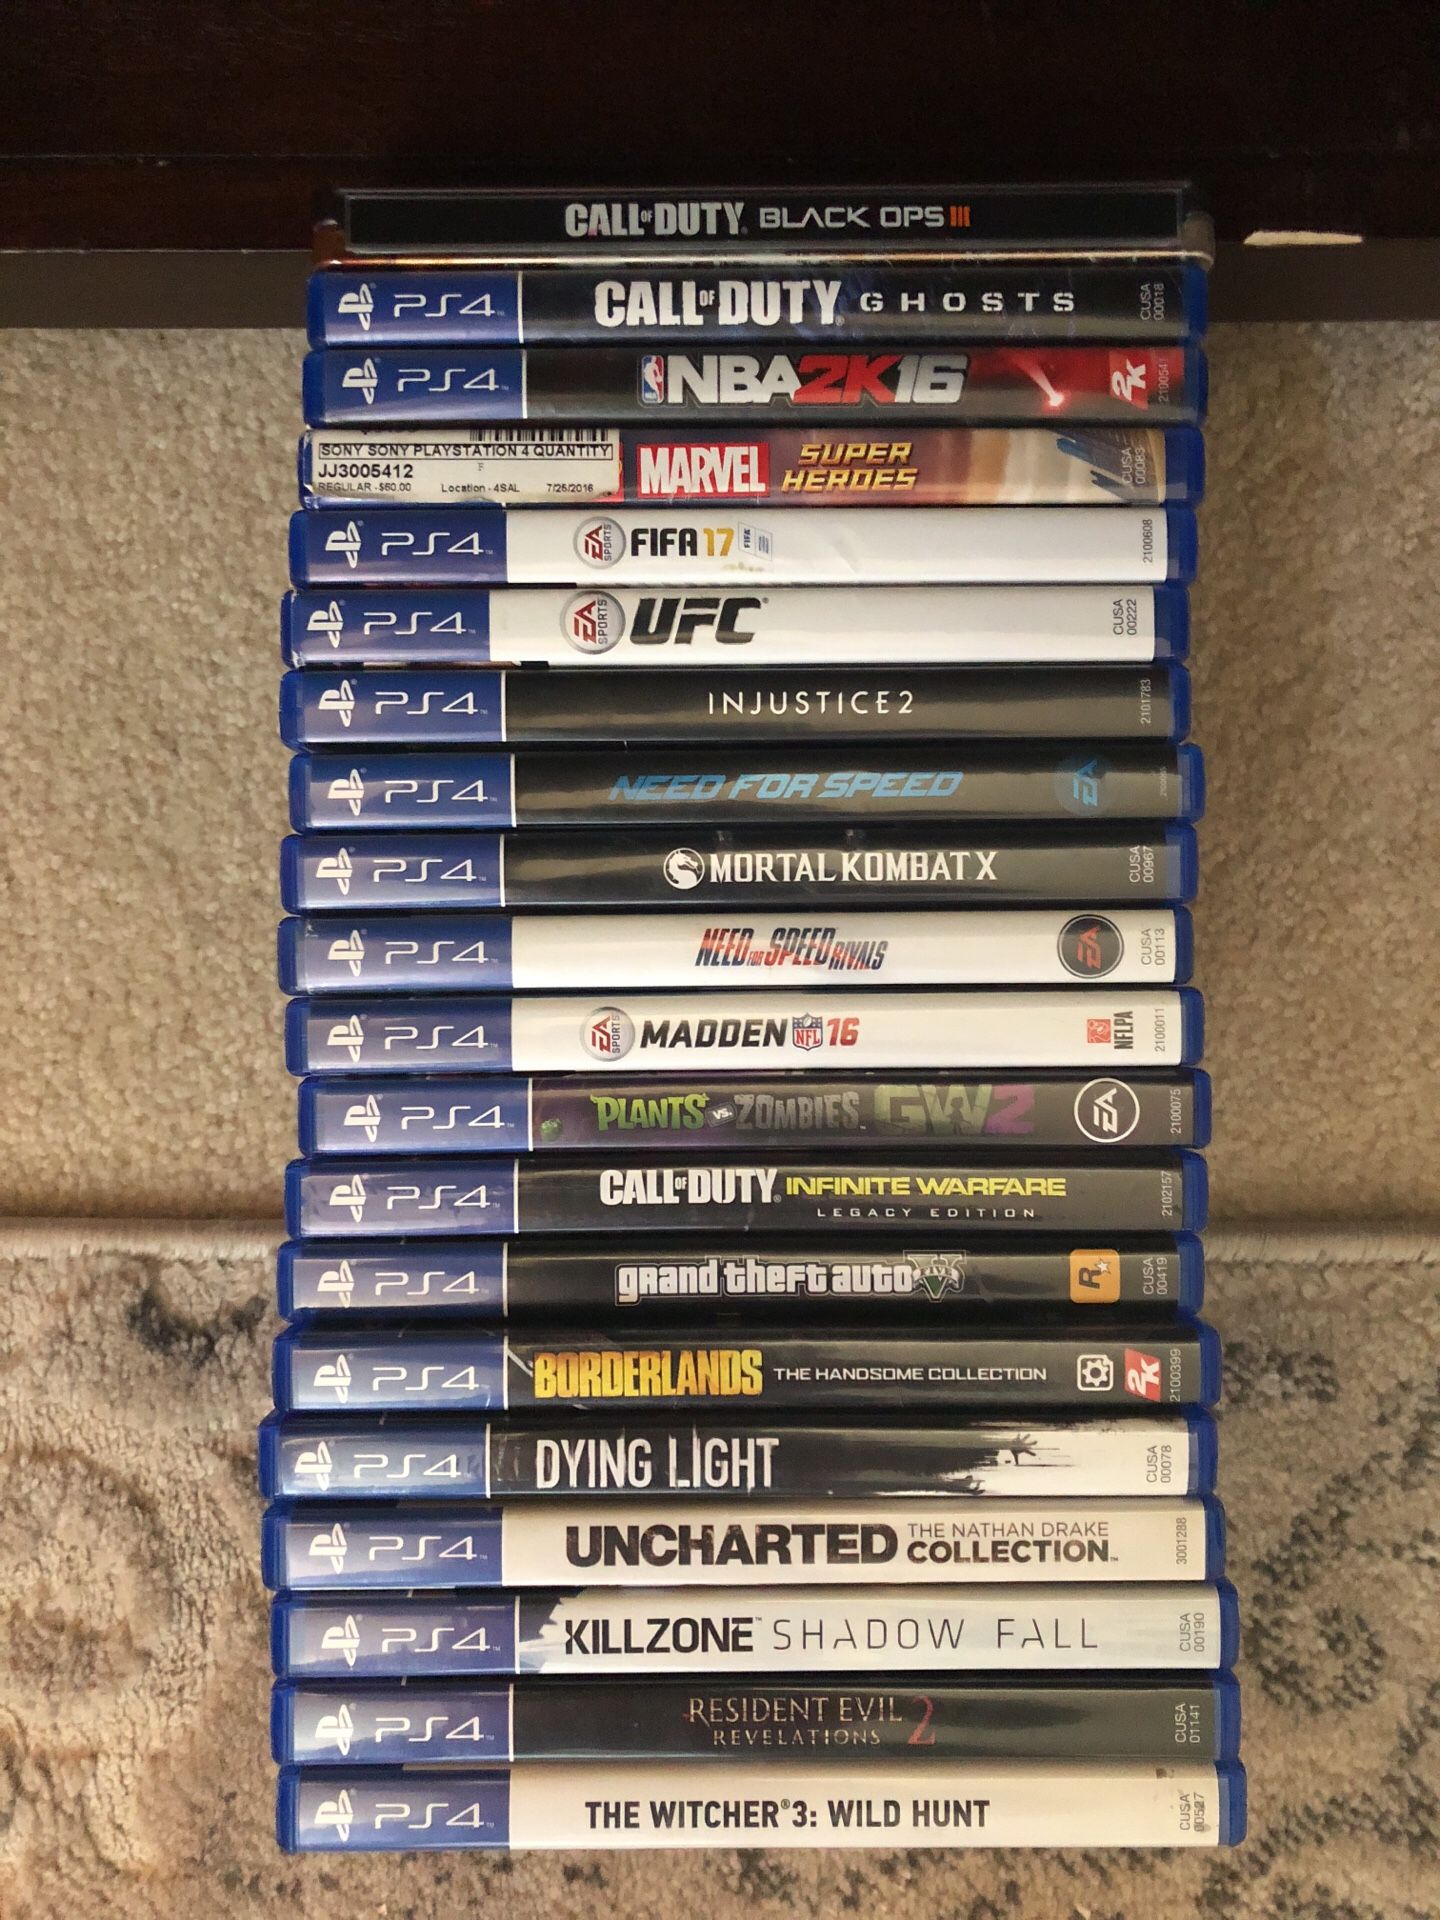 PS4 System, Controllers, and 20 Games IF posted still avail